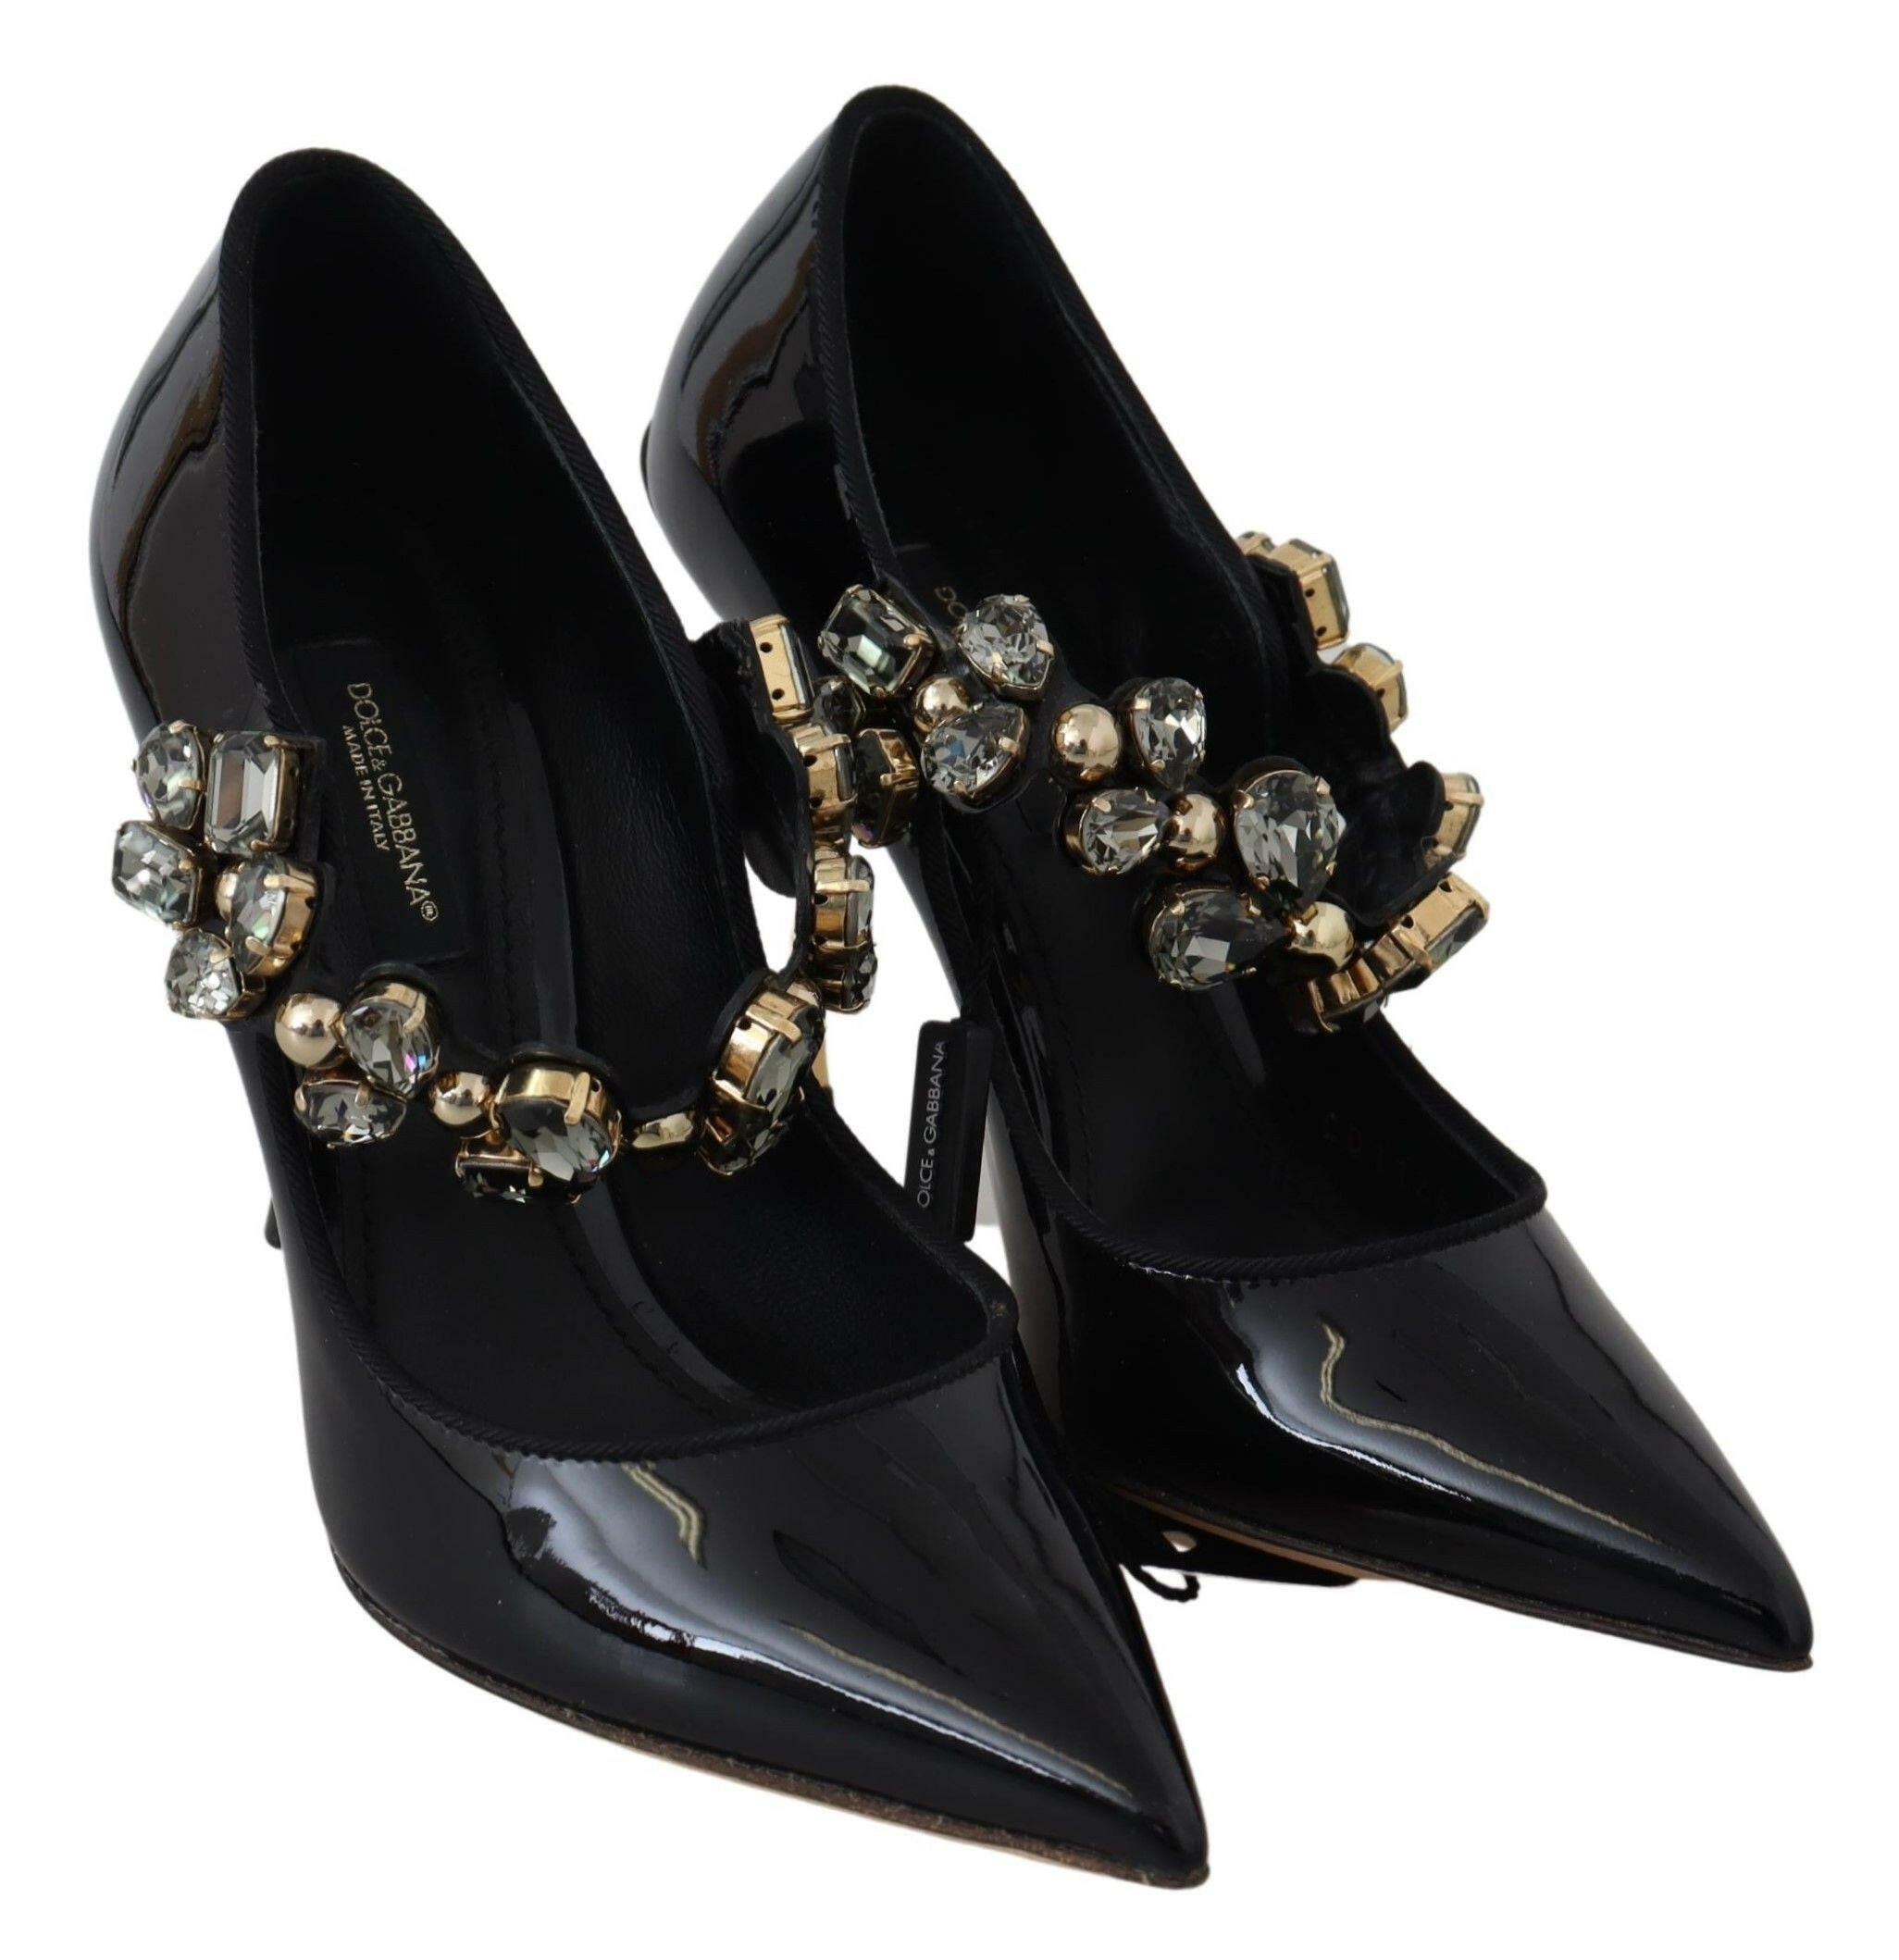 Dolce & Gabbana Black Leather Crystal Shoes Mary Jane Pumps - GENUINE AUTHENTIC BRAND LLC  